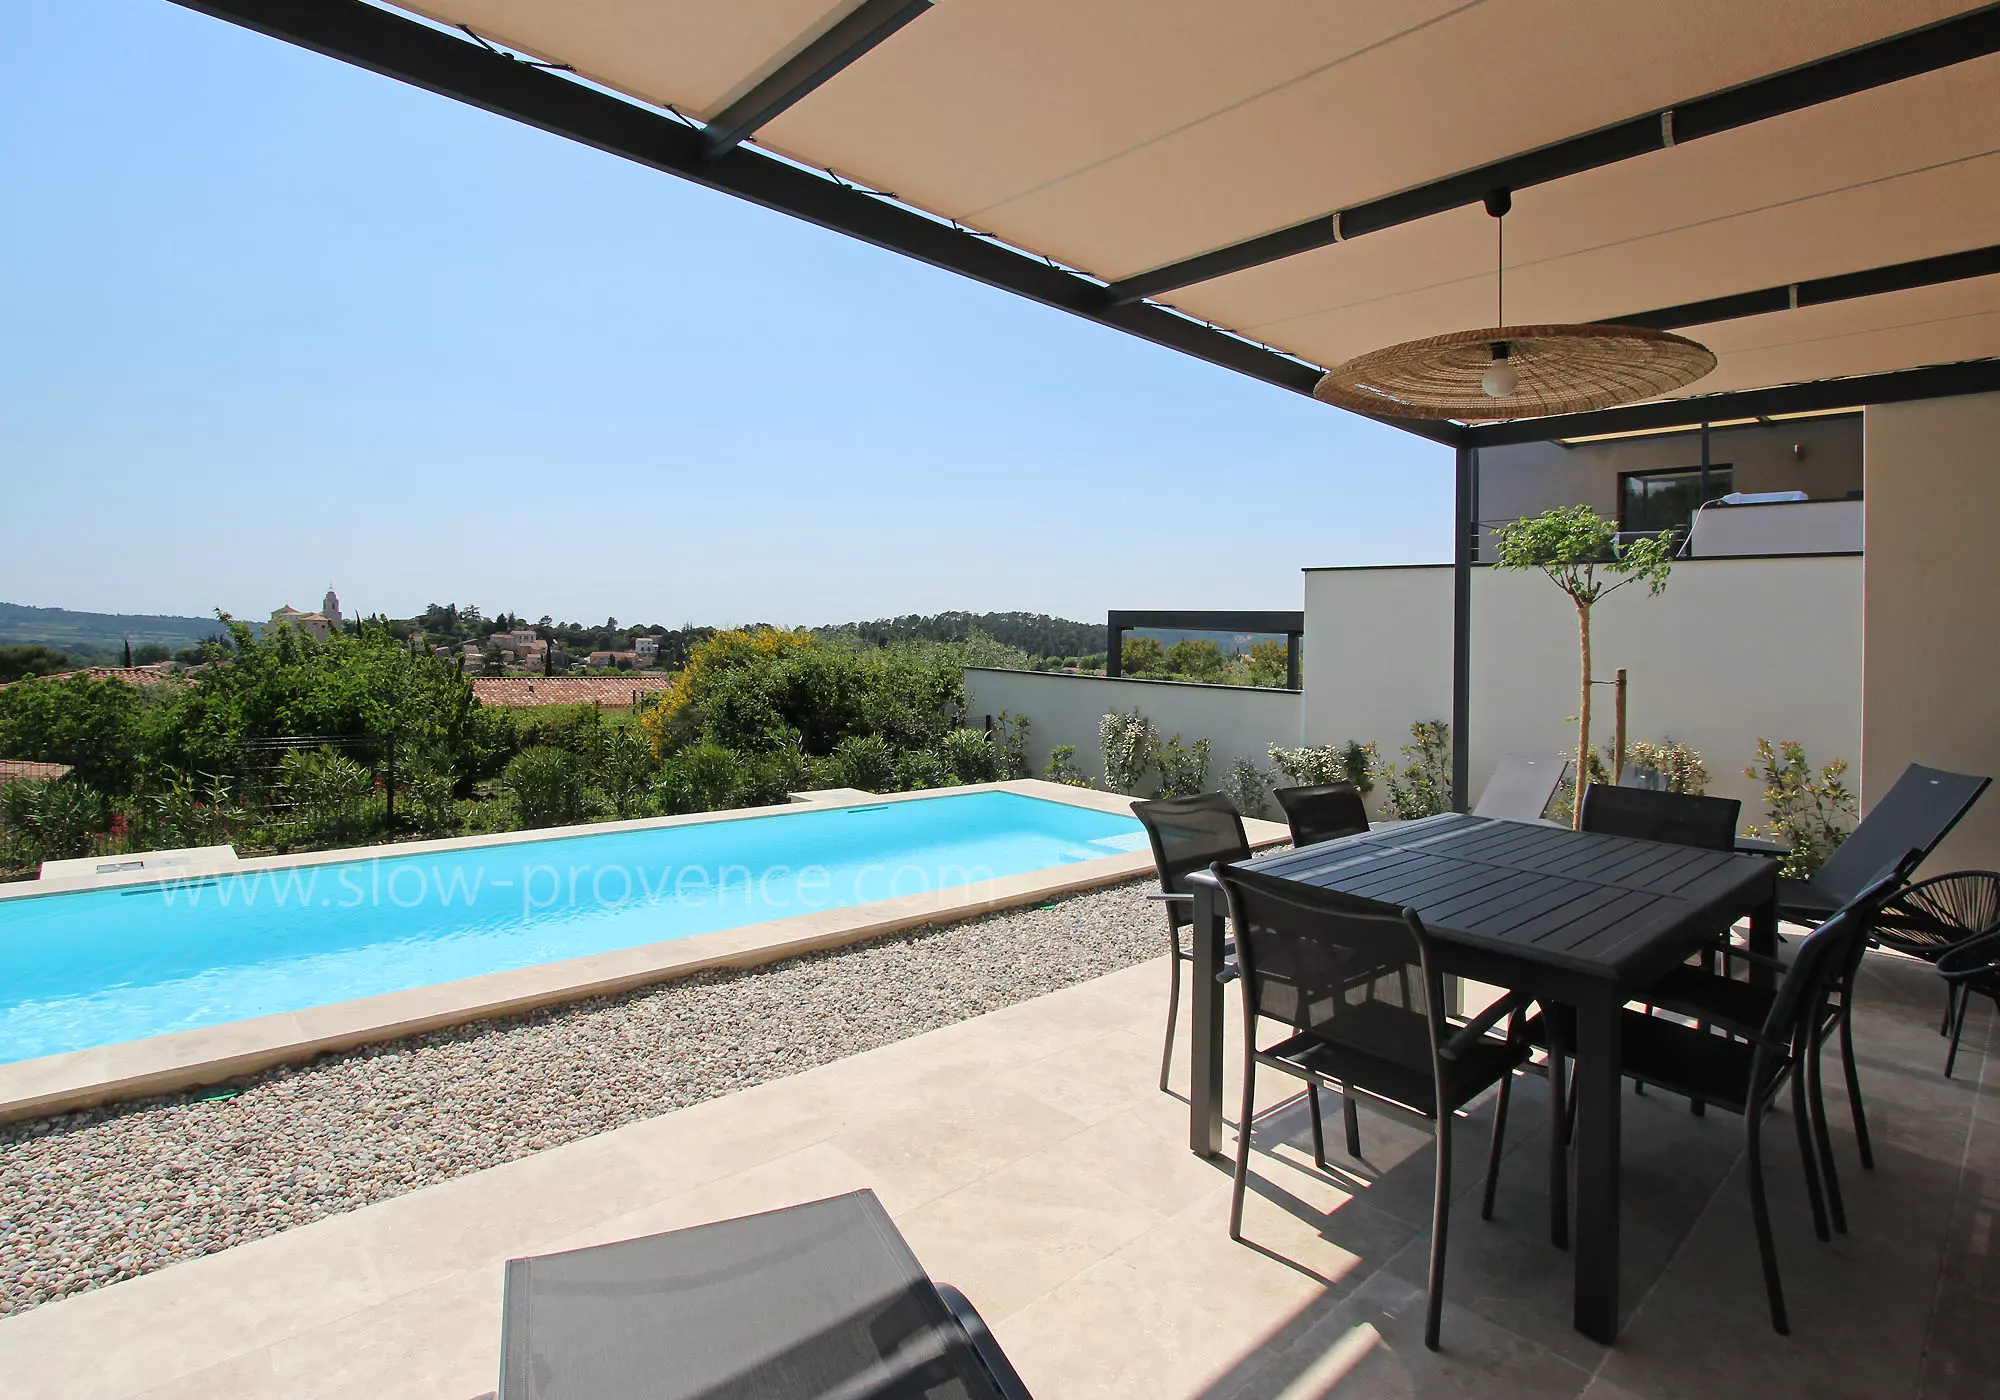 Shaded terrace with heated swimming pool